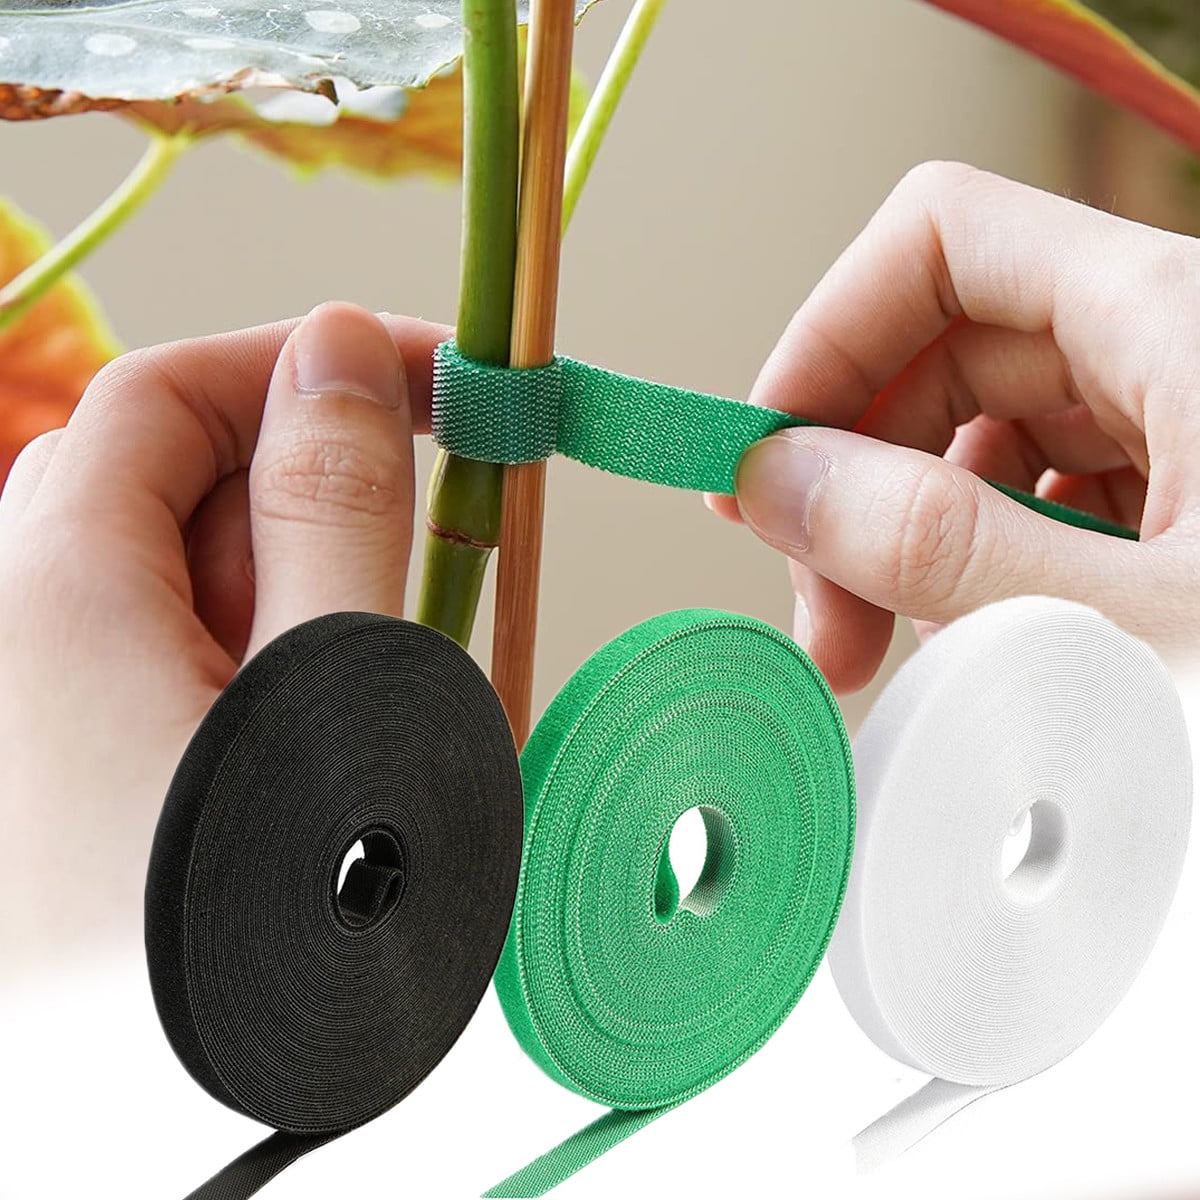 MYLTW Reusable Plant Ties for Climbing Plants,Plan Straps,Nylon Plant Tape Strap Gardening Tips,Tomato Plant Support,Garden Wire Ties for Cables(50 Foot x